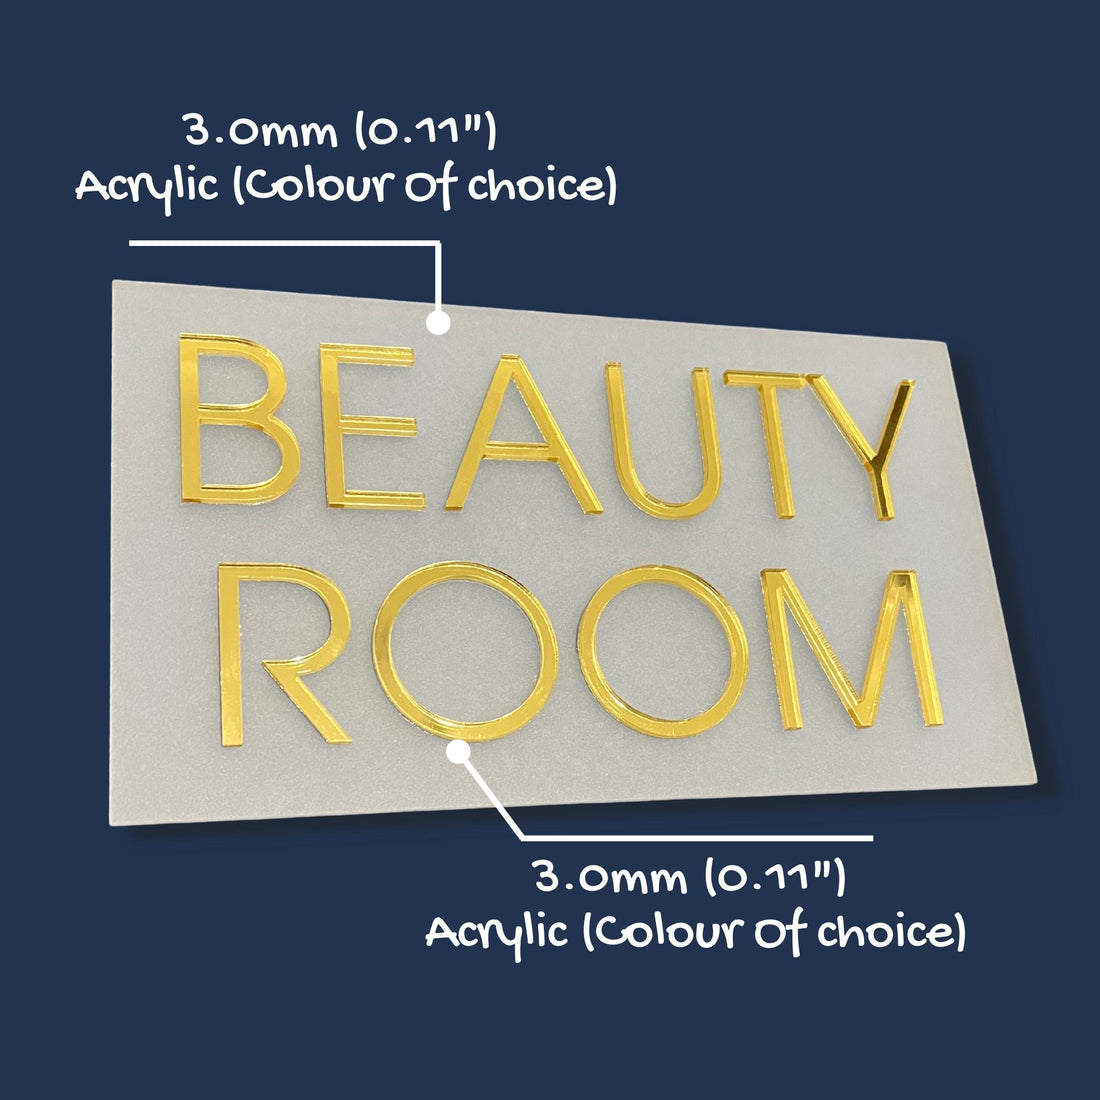 Personalised Floating Modern Acrylic Door Sign, Room Number Plaque, Laser Cut Custom Wall Business Room Plate, Company Signage for Spa, Nail Shop, Restaurant, Cafe, Office, Apartment, Hotel